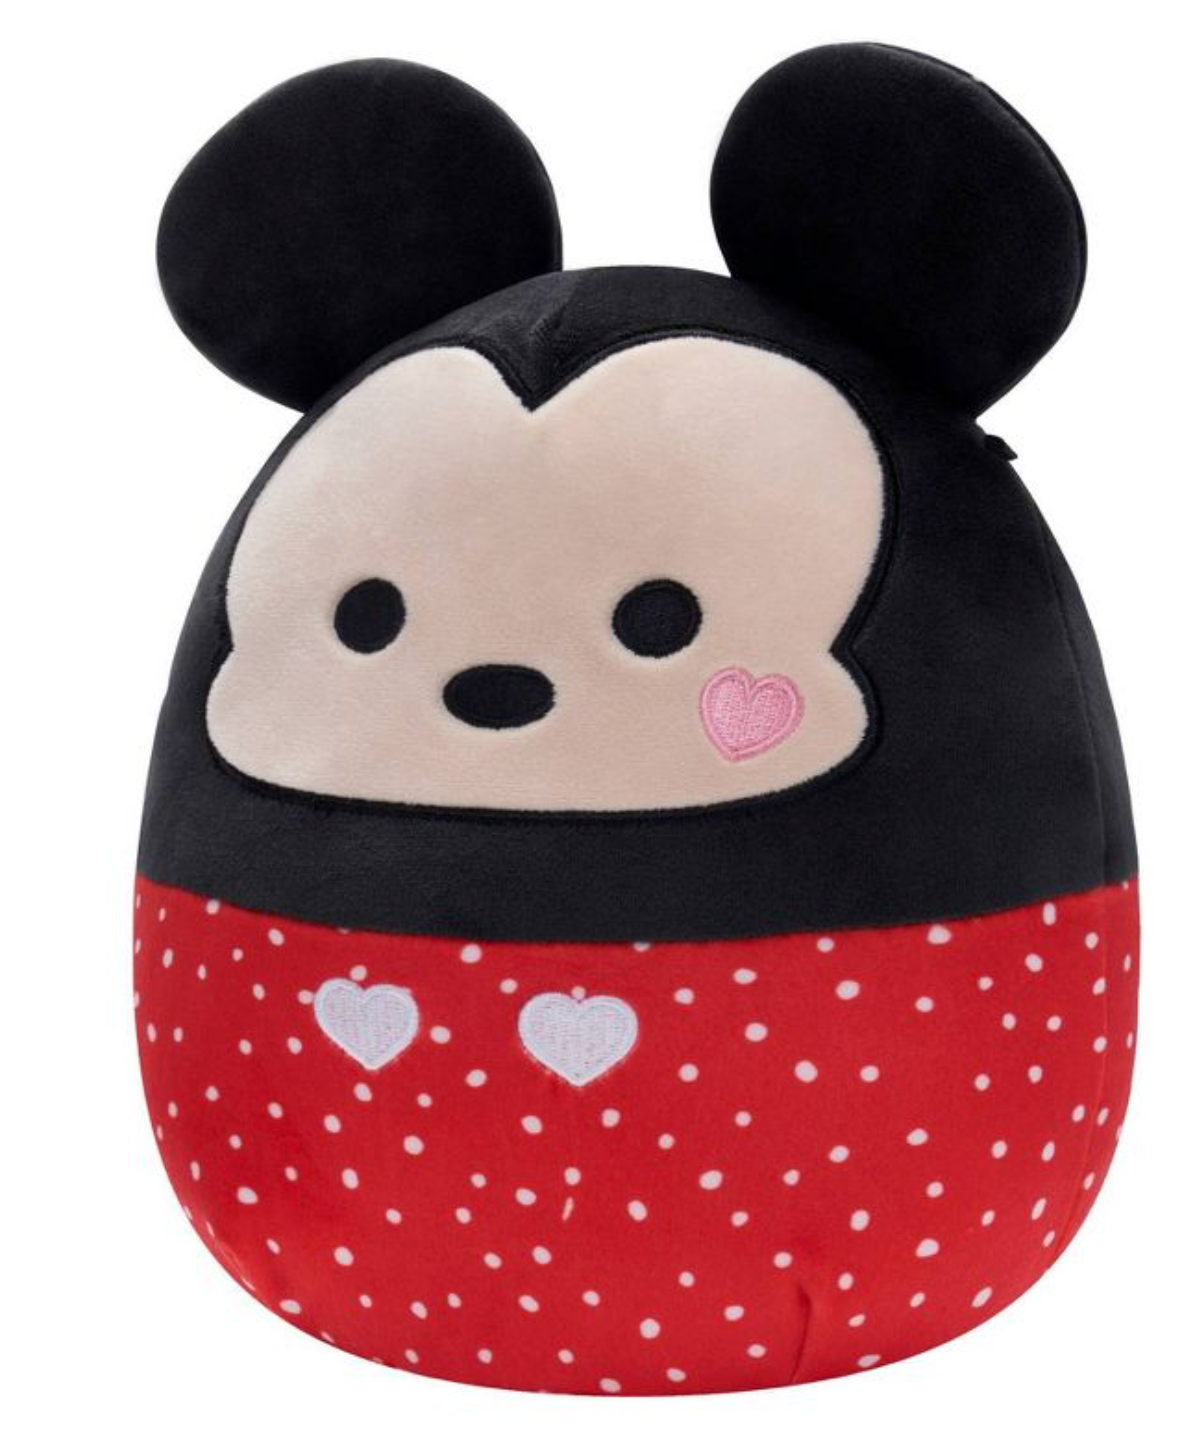 Squishmallows 8" Disney Mickey Mouse Valentine’s Day Plush Toy New With Tag